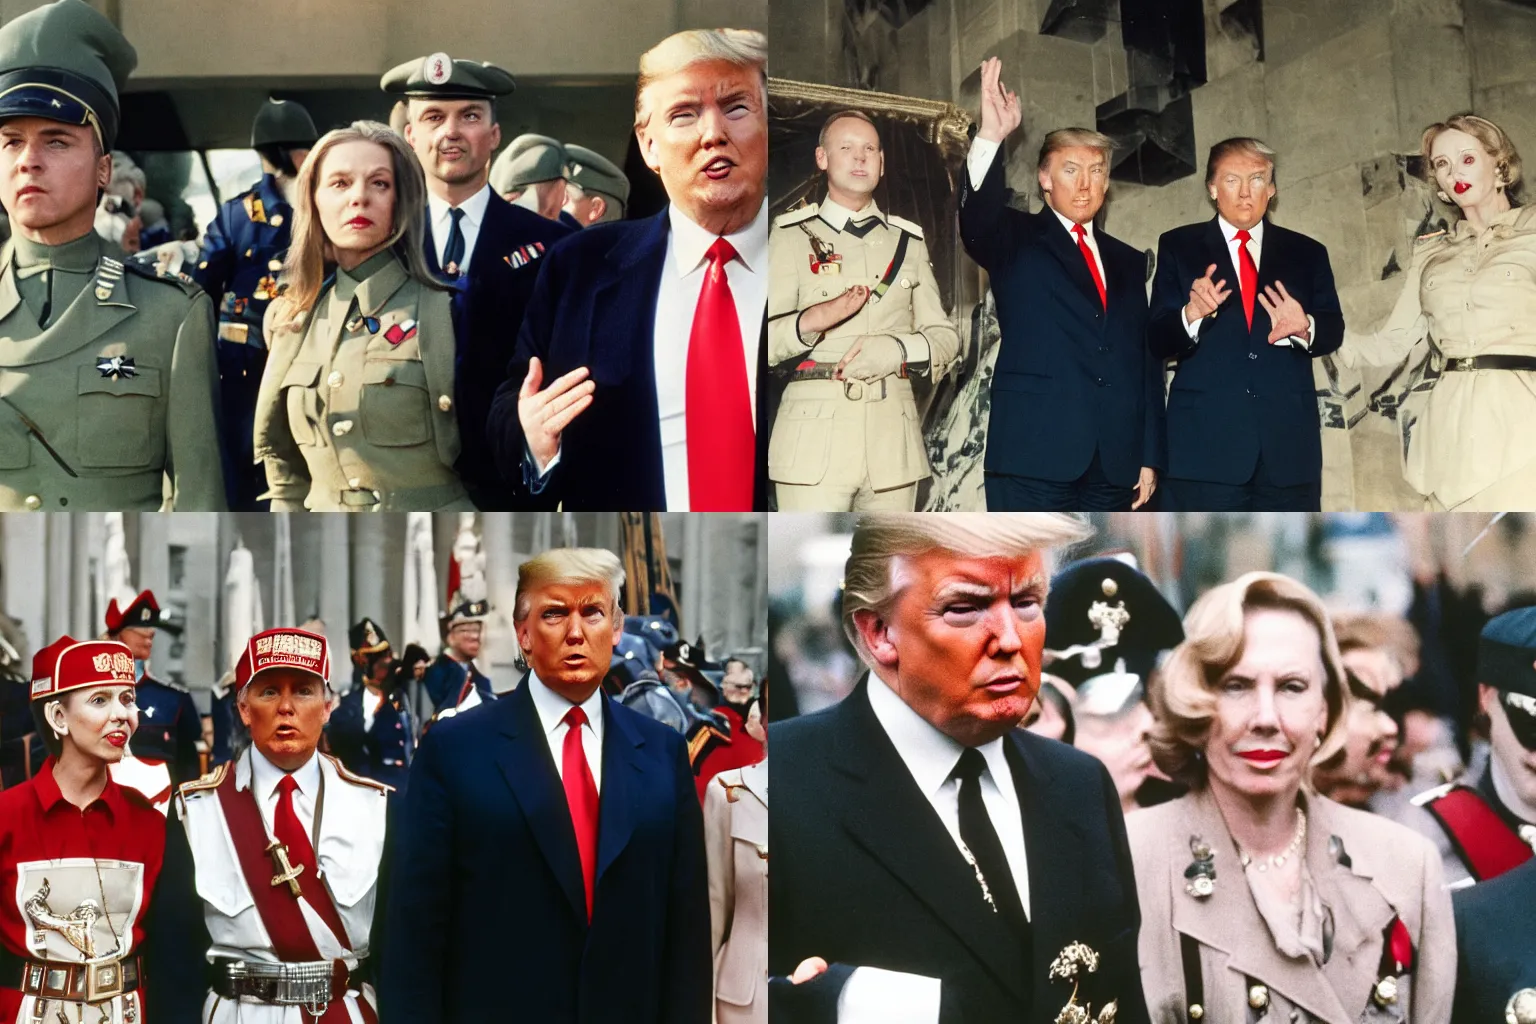 Prompt: color closeup photograph of Donald Trump wearing roman armor Reichsstaffelführer outfit saluting, Sidney Powell standing nearby wearing Schutzstaffel outfit, off-camera flash, canon 24mm f11 aperture, Ektachrome color photograph